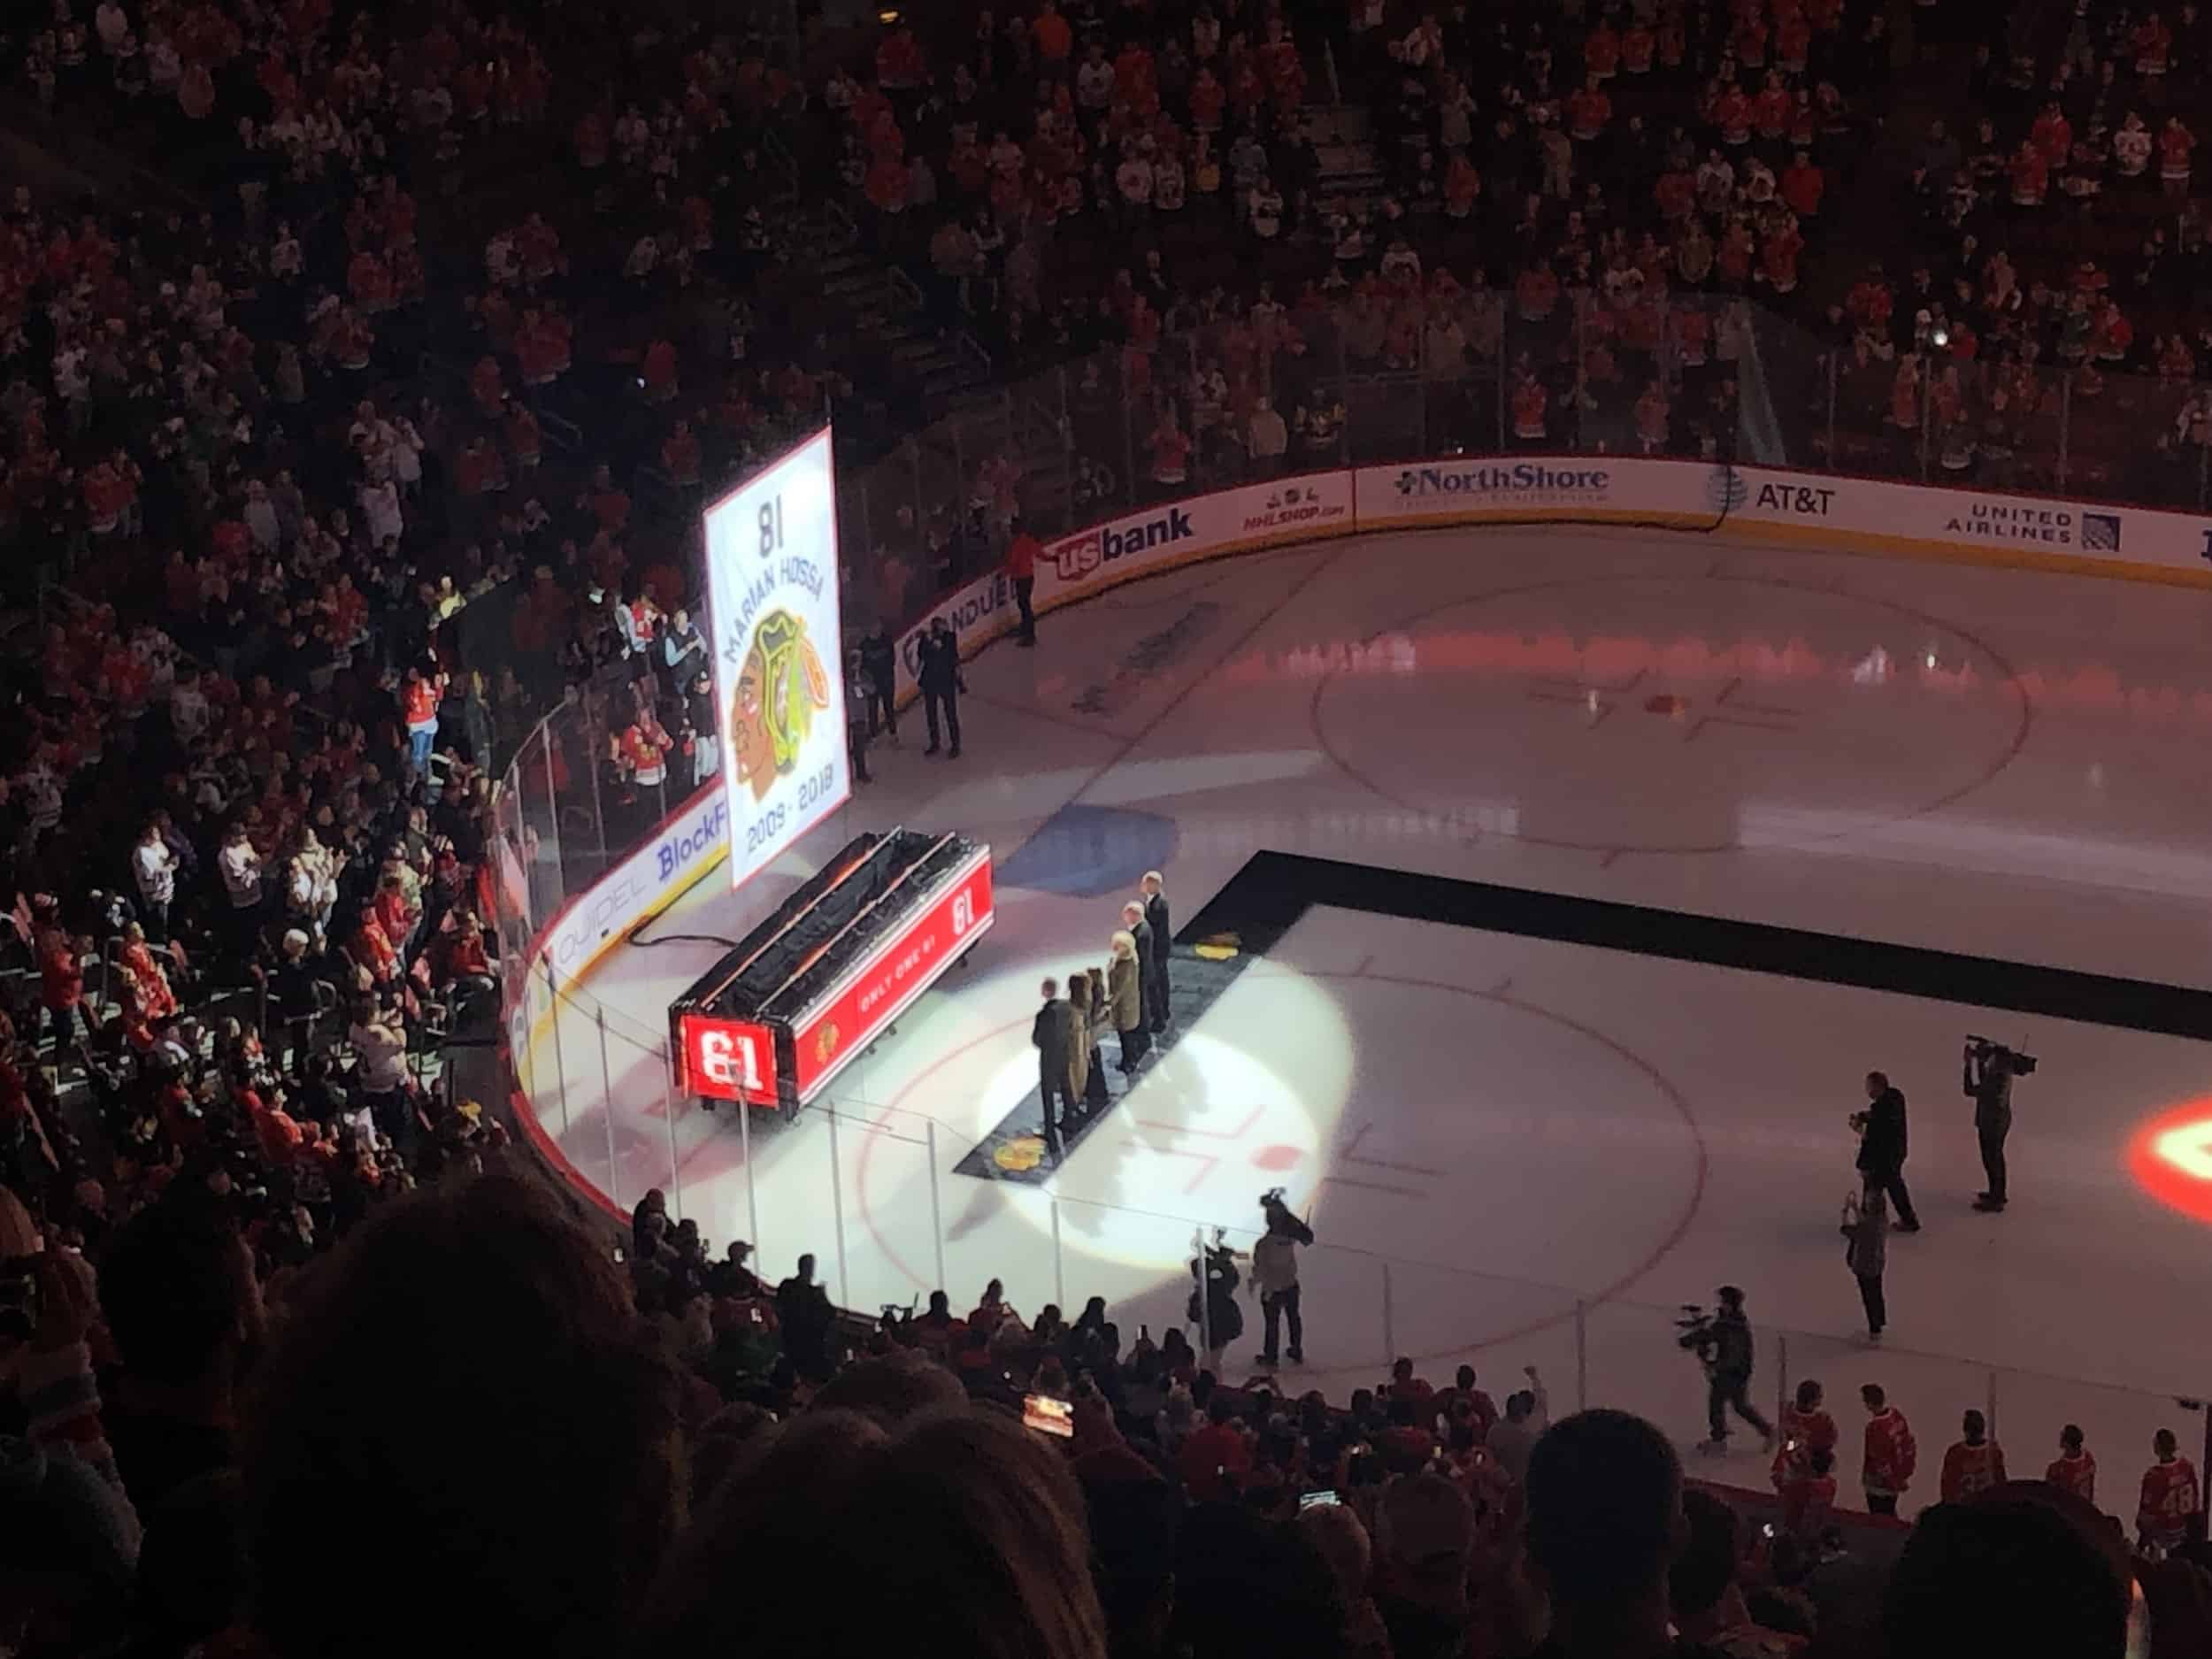 Hossa and his family standing in front of the banner during the Marian Hossa jersey retirement ceremony at the United Center in Chicago, Illinois